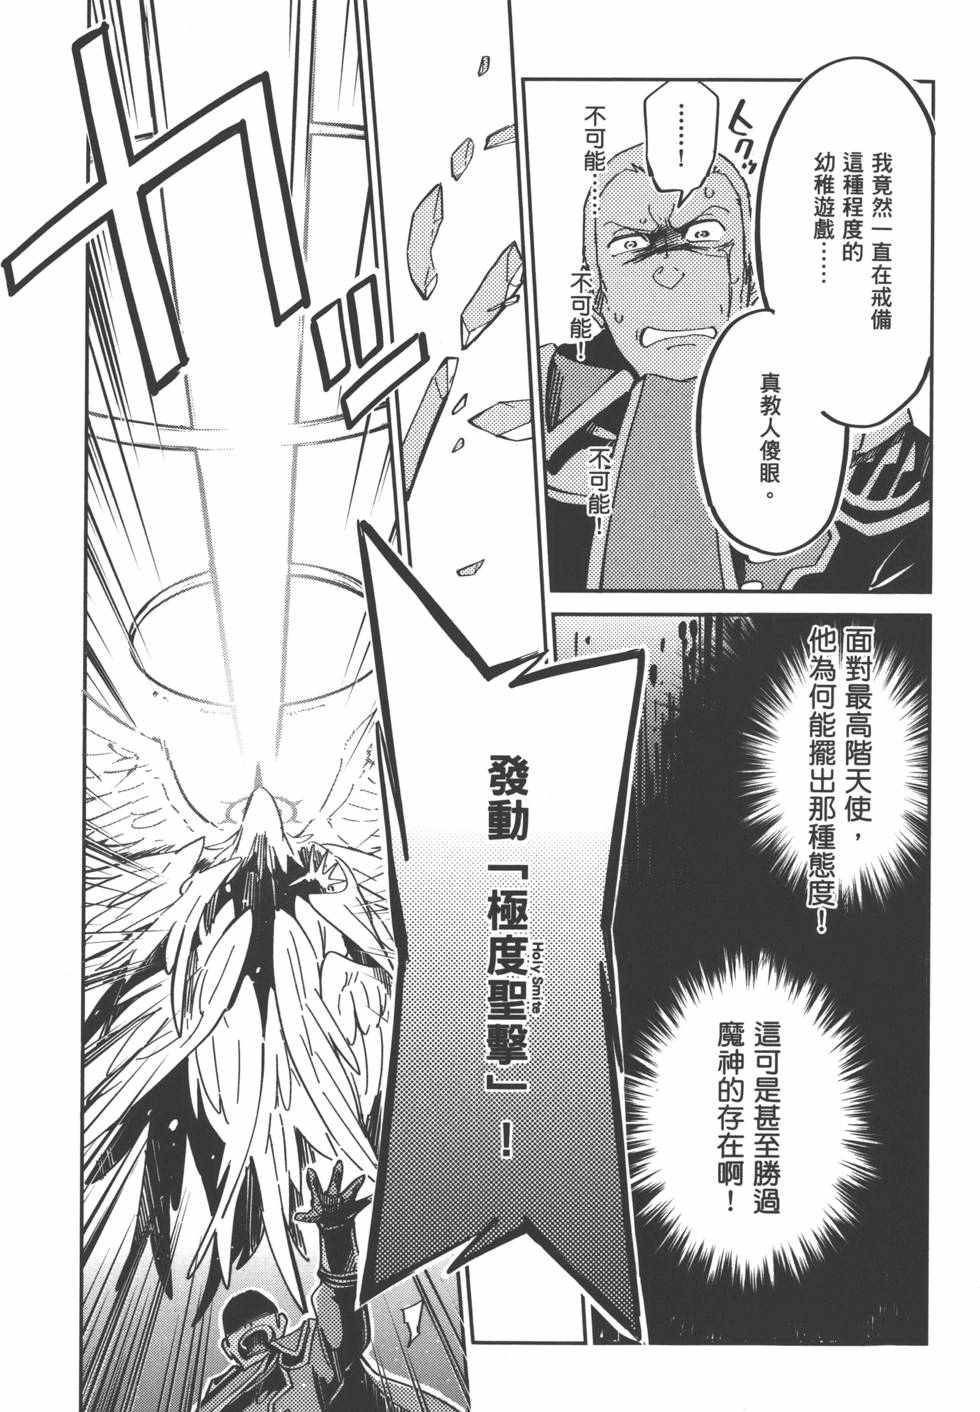 《OVERLORD》漫画 01卷